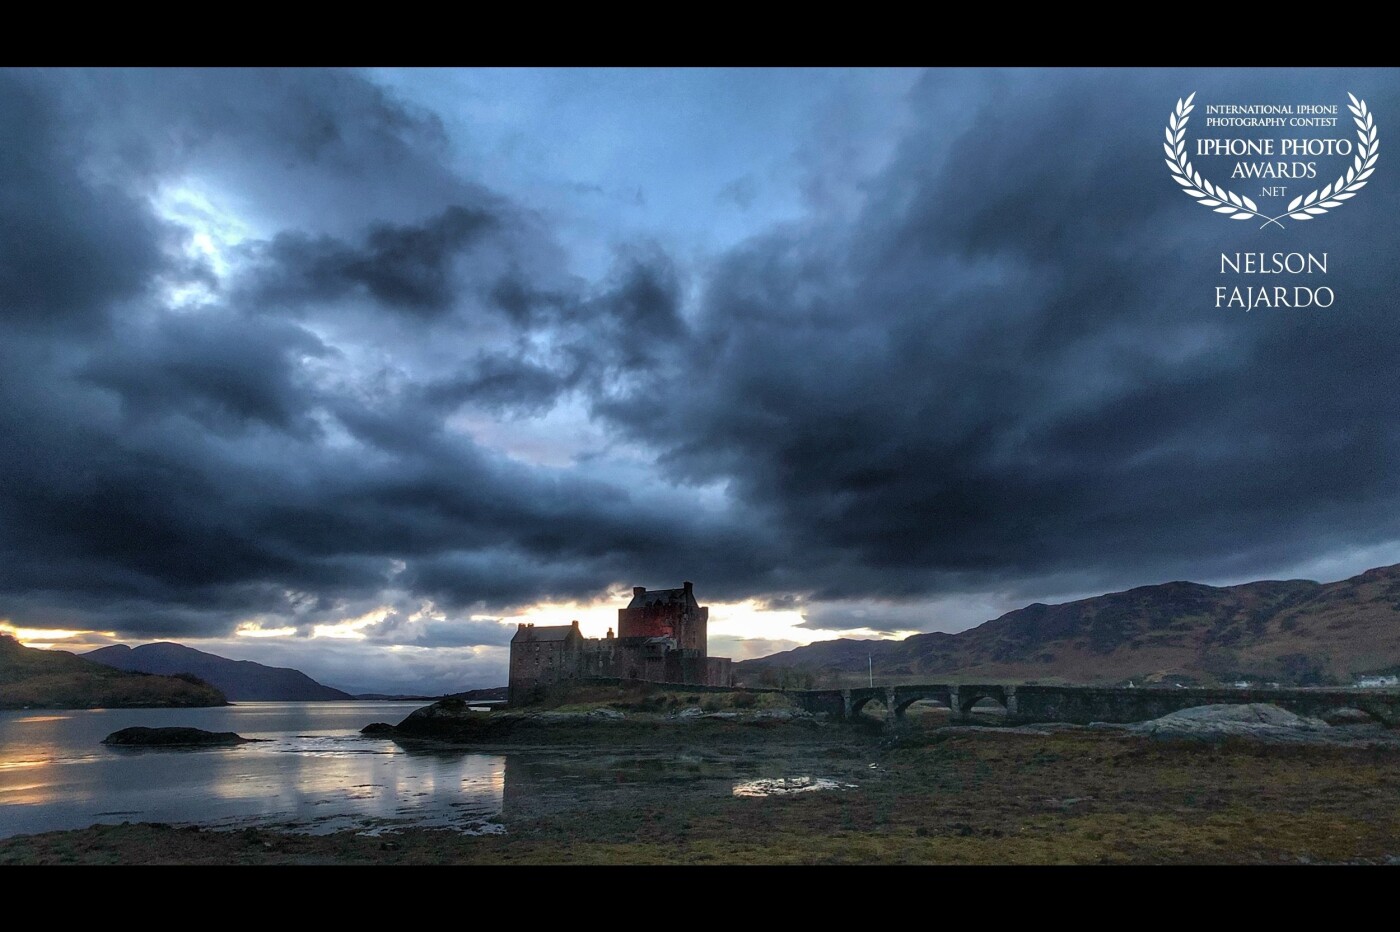 At dusk in Scotland’s Eilean Donan Castle with storm cloud coming in from the Atlantic Ocean. The castle was picture perfect at any time of the day.